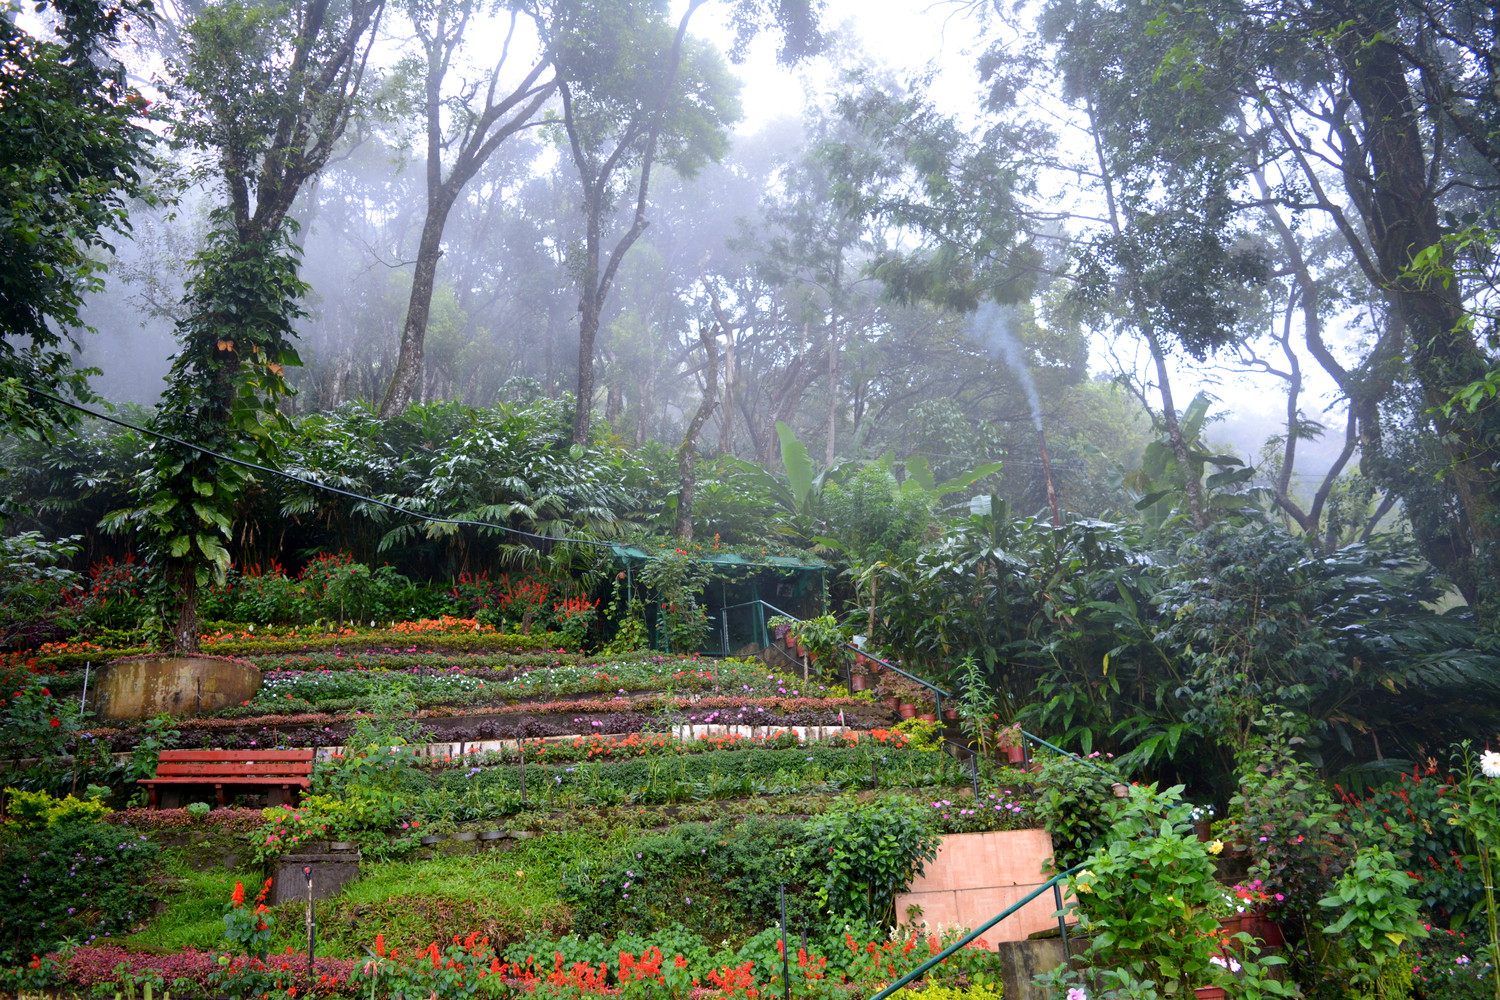 A garden of flowers at the bottom, tall trees covered in mist at the top, and a staircase to climb this garden along the slope of a hill